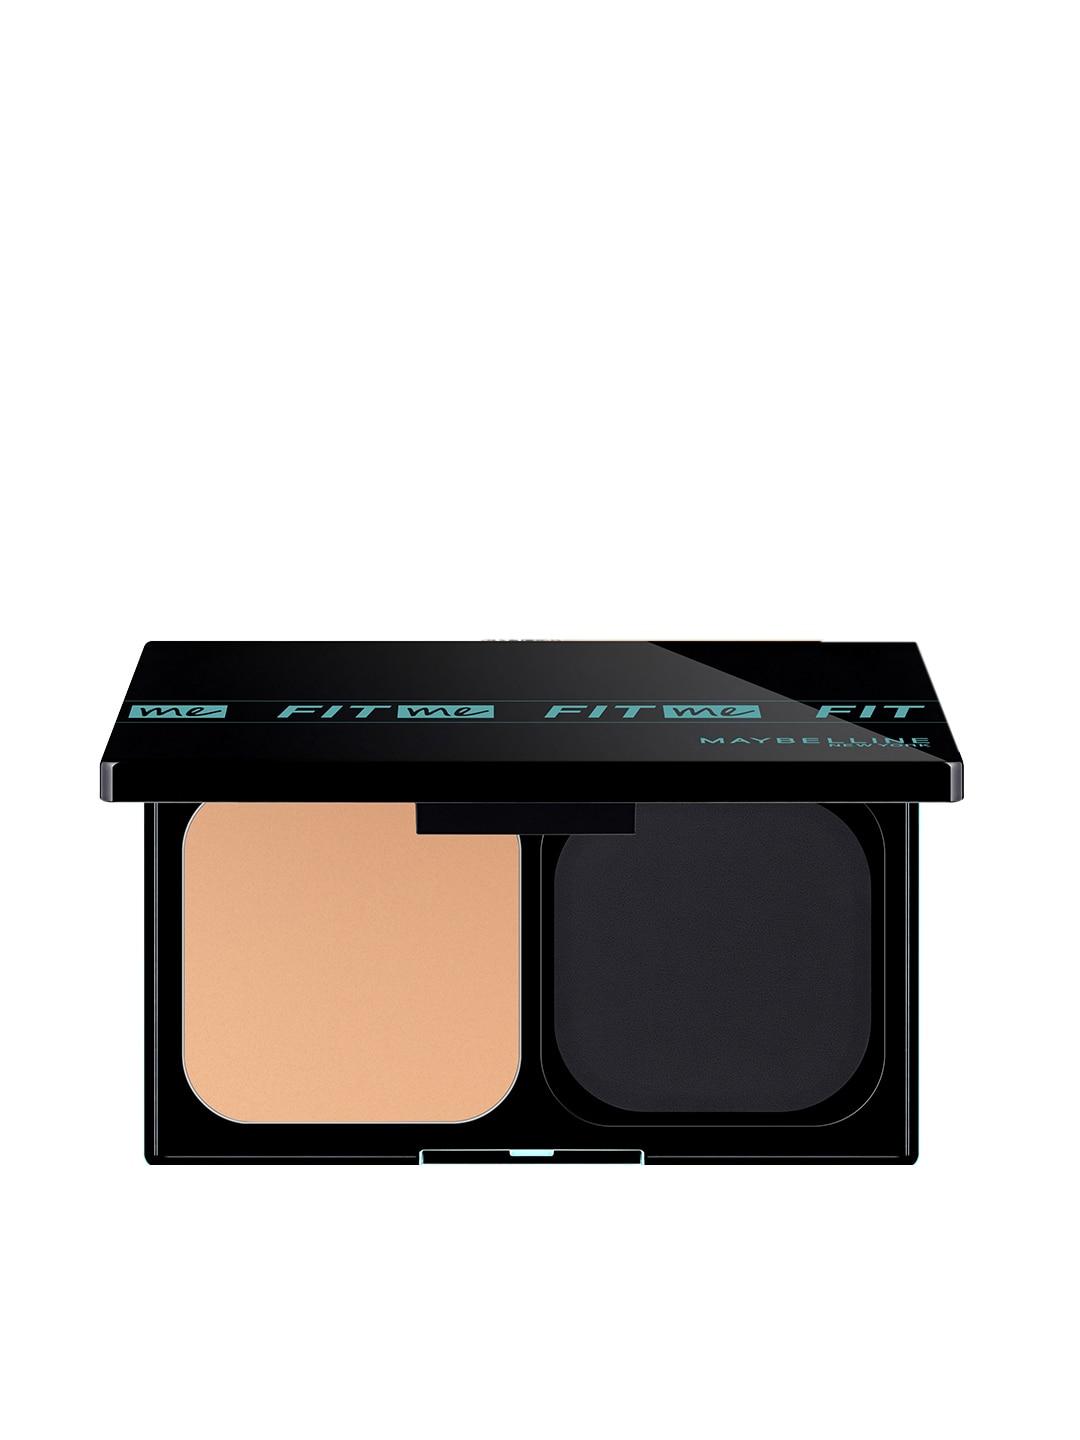 maybelline-new-york-fit-me-spf-44-ultimate-powder-foundation---shade-230